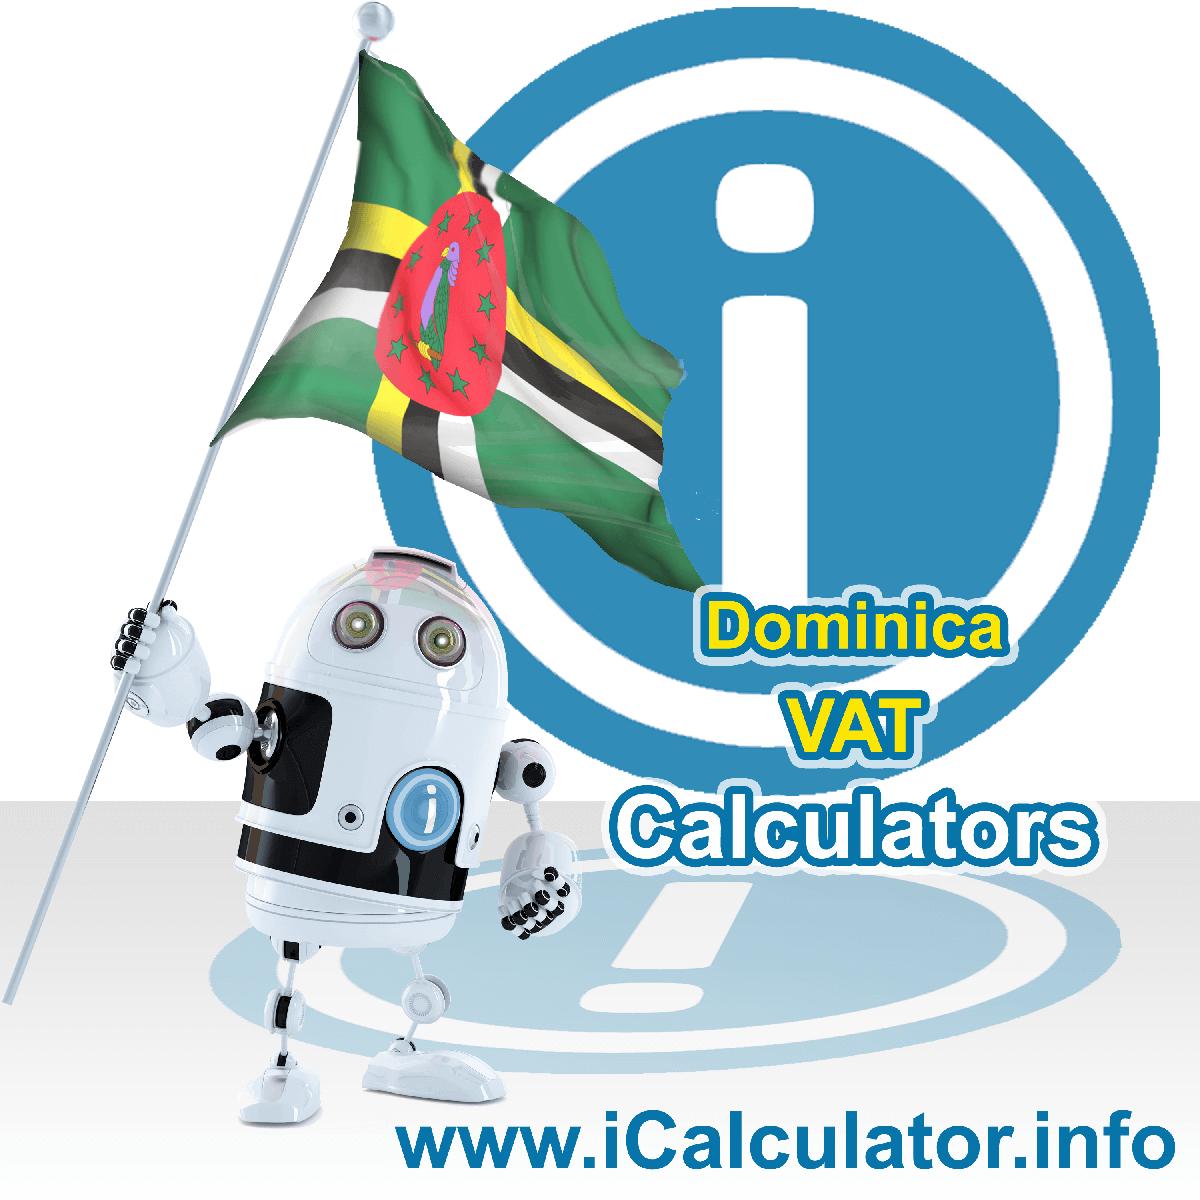 Dominica VAT Calculator. This image shows the Dominica flag and information relating to the VAT formula used for calculating Value Added Tax in Dominica using the Dominica VAT Calculator in 2022